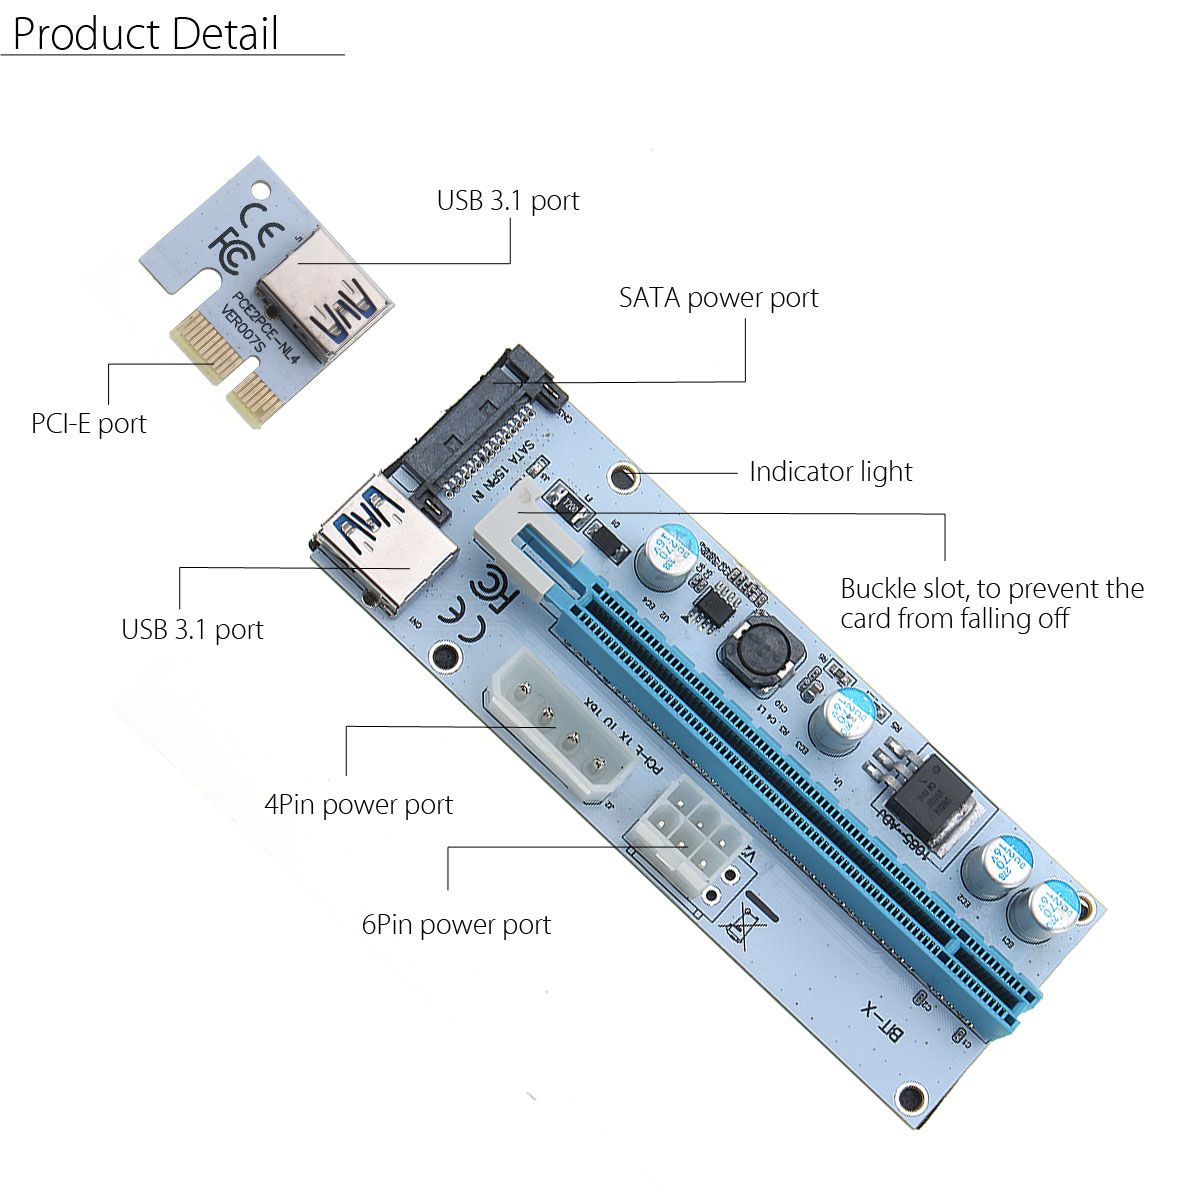 USB30-PCI-E-1x-To-16x-SATA-4P6P-Extender-Riser-Card-Adapter-Power-Cable-Miner-1206818